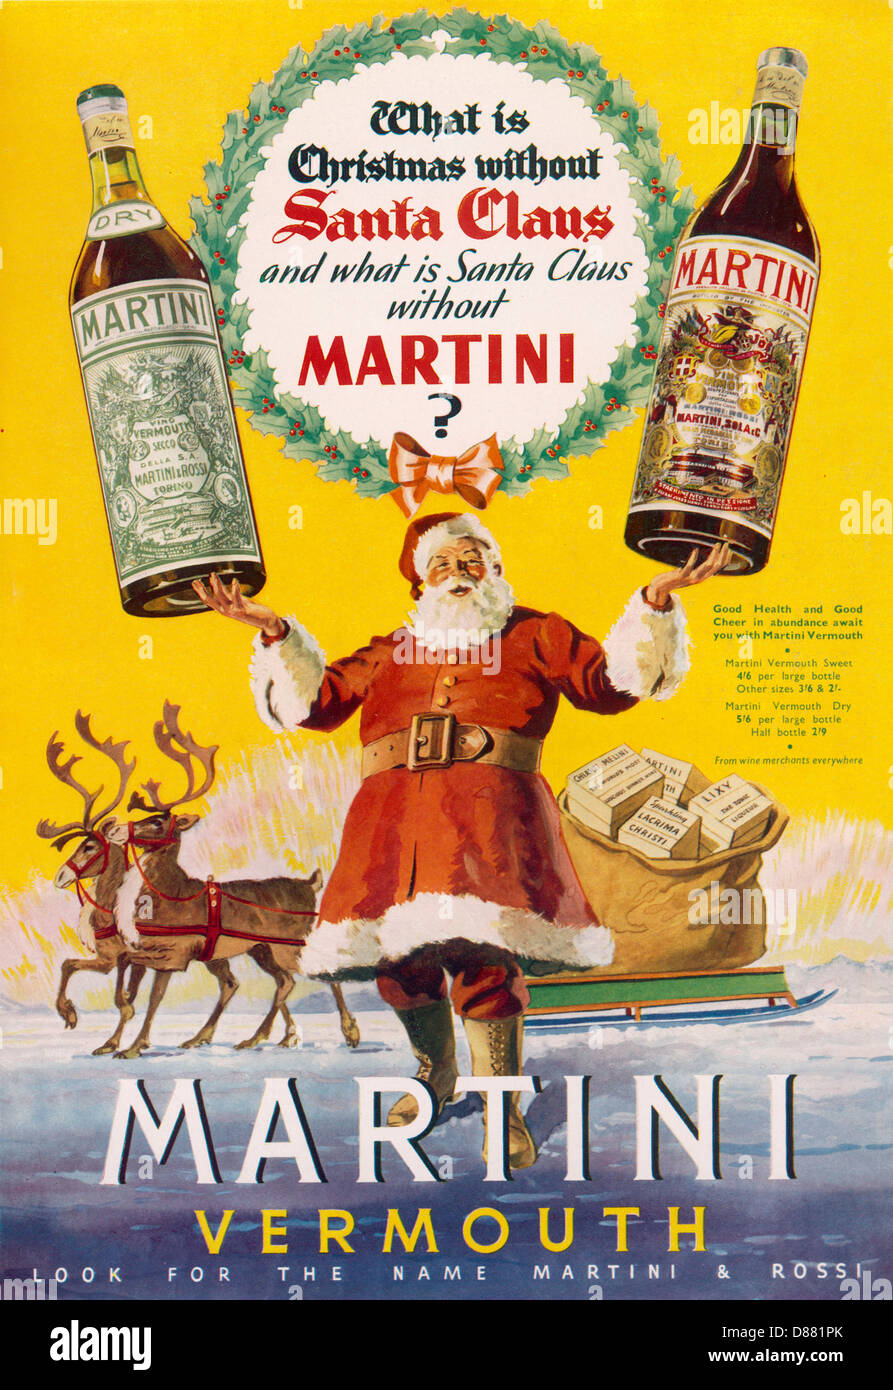 Martini Advert High Resolution Stock Photography and Images - Alamy